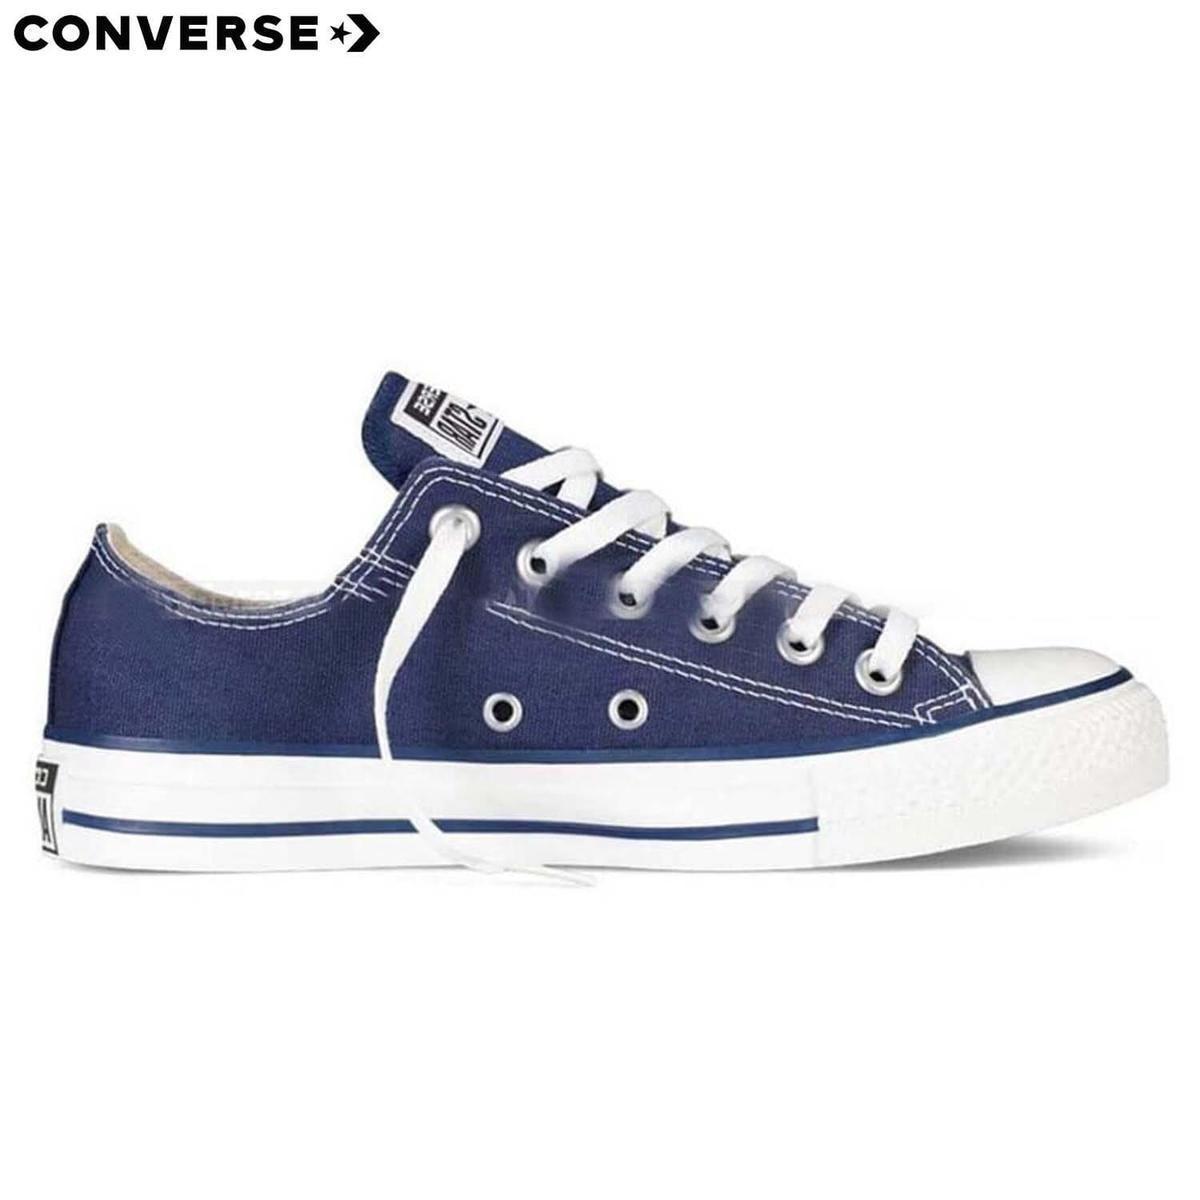 converse chuck taylor all star ox navy canvas low top shoes for unisex m9697